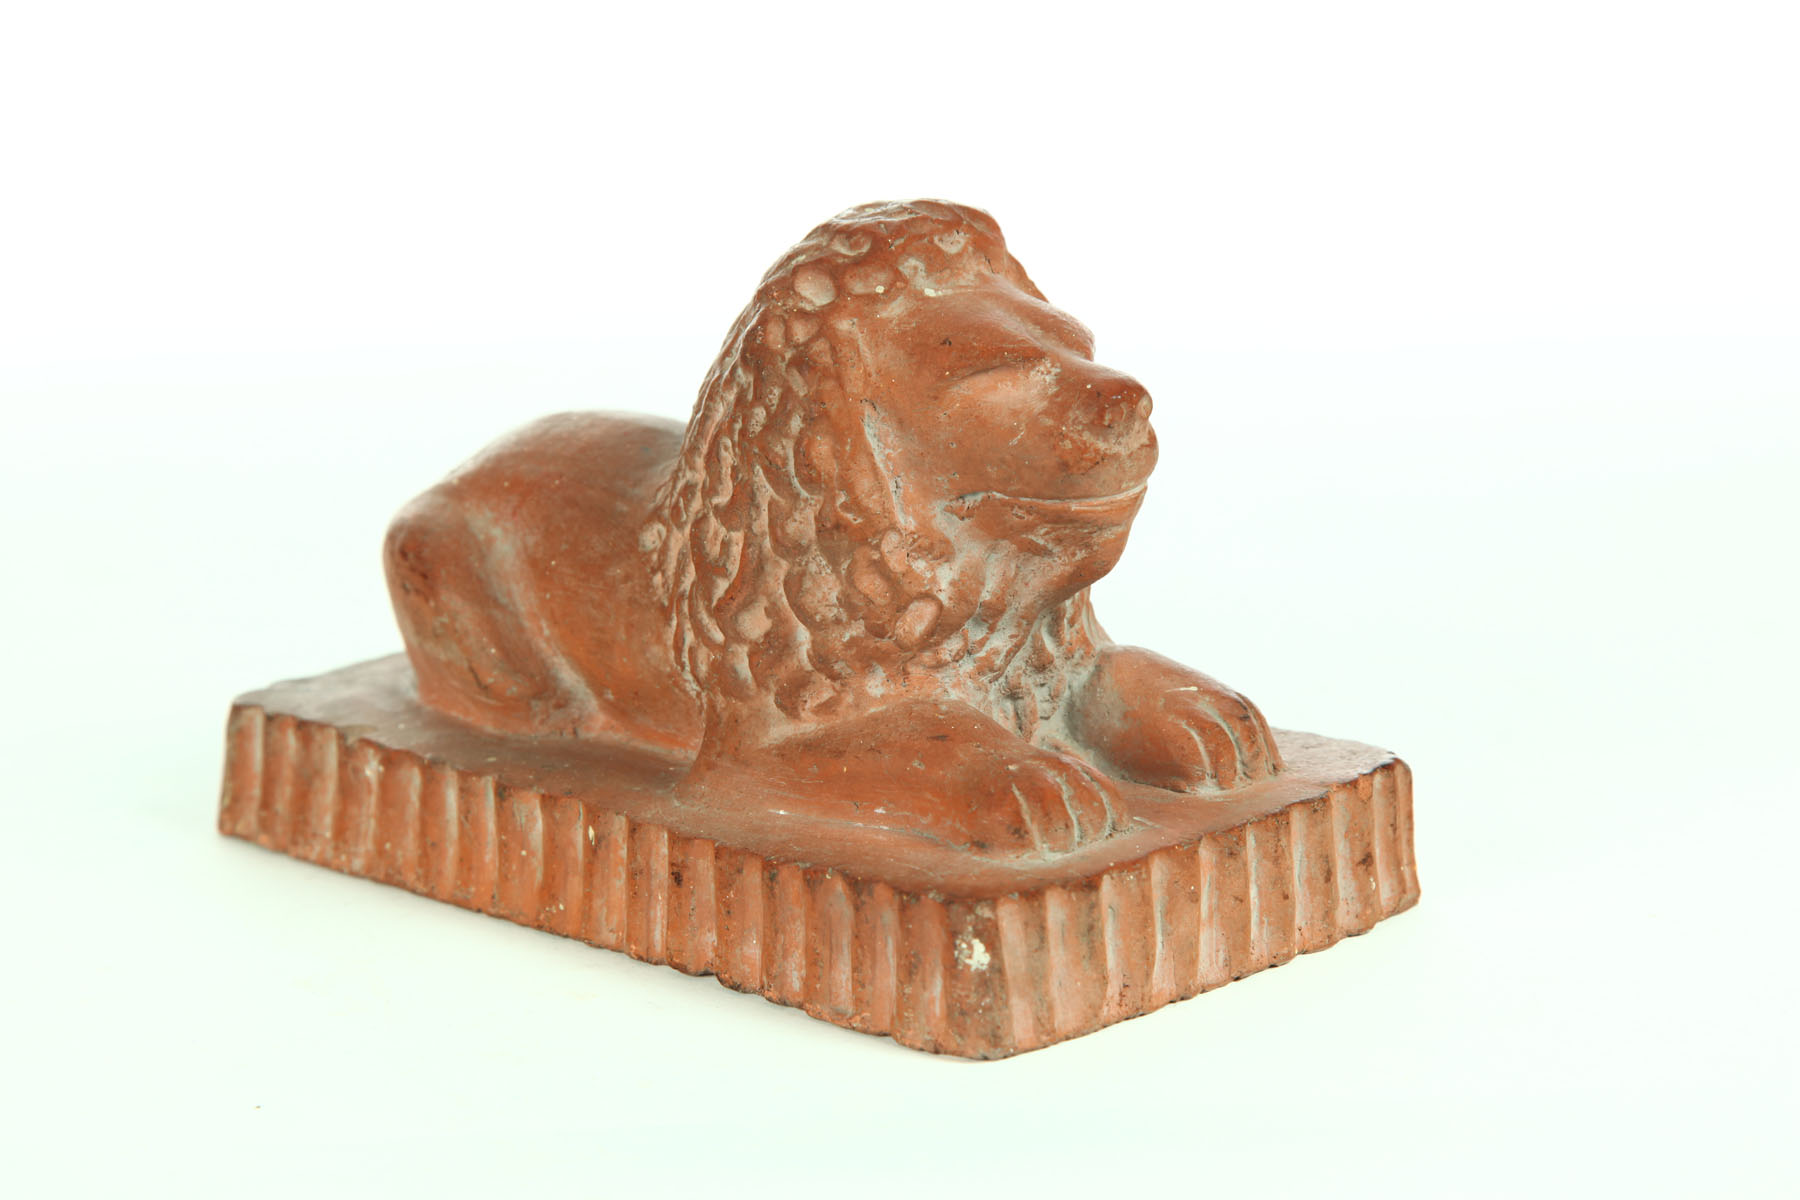 SEWERTILE LION.  Ohio  mid 20th